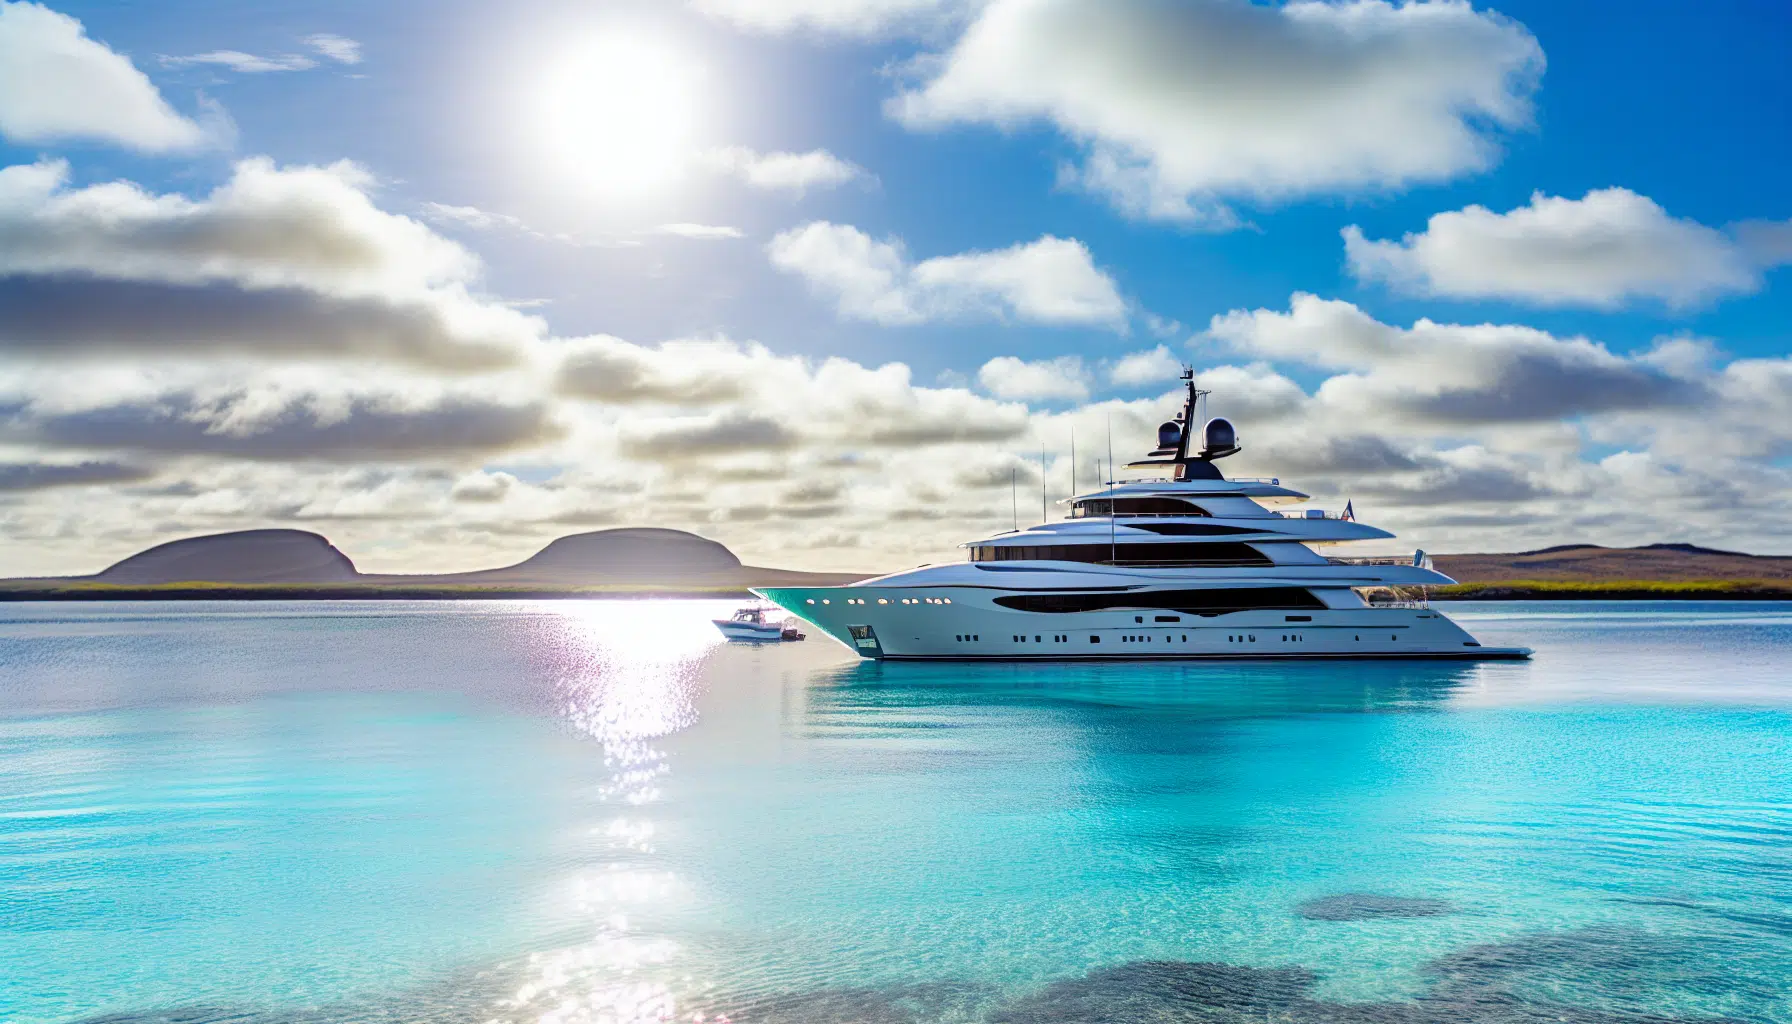 Luxury yacht in the Galapagos